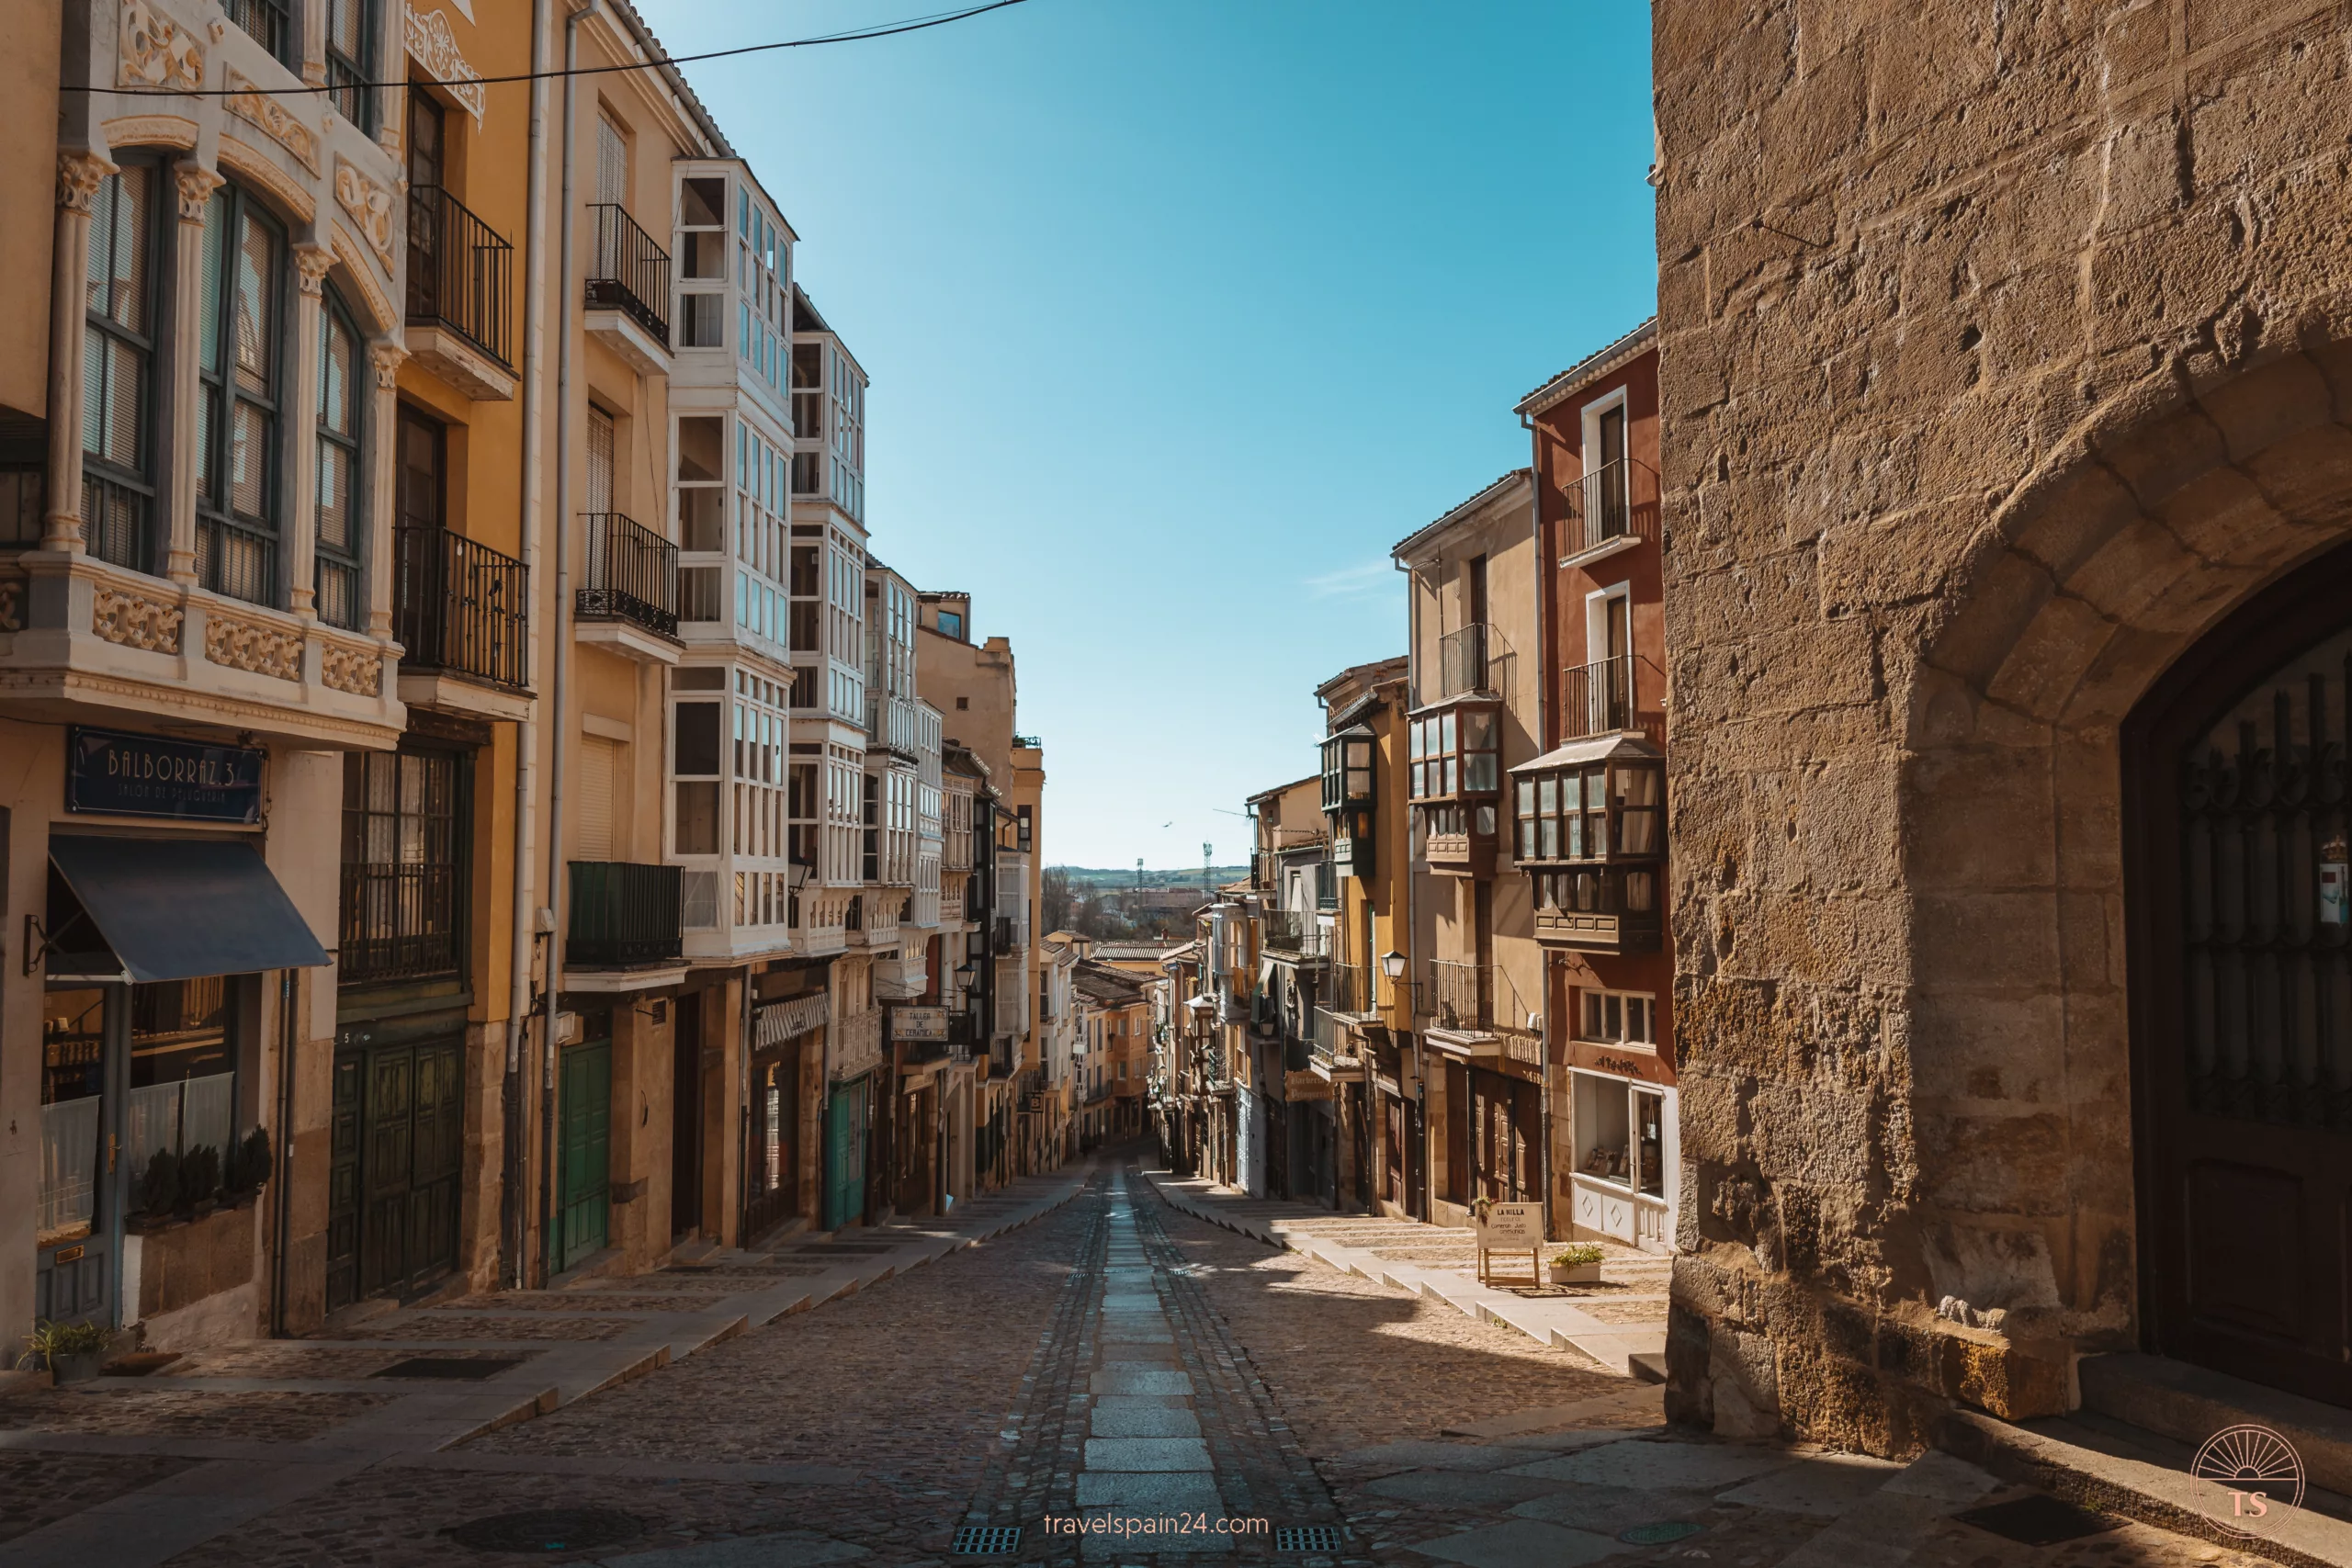 Deserted Calle de Balborraz in Zamora under a clear sunny sky, capturing the peaceful and picturesque essence of the city's historic streets early in the morning, inviting exploration and discovery